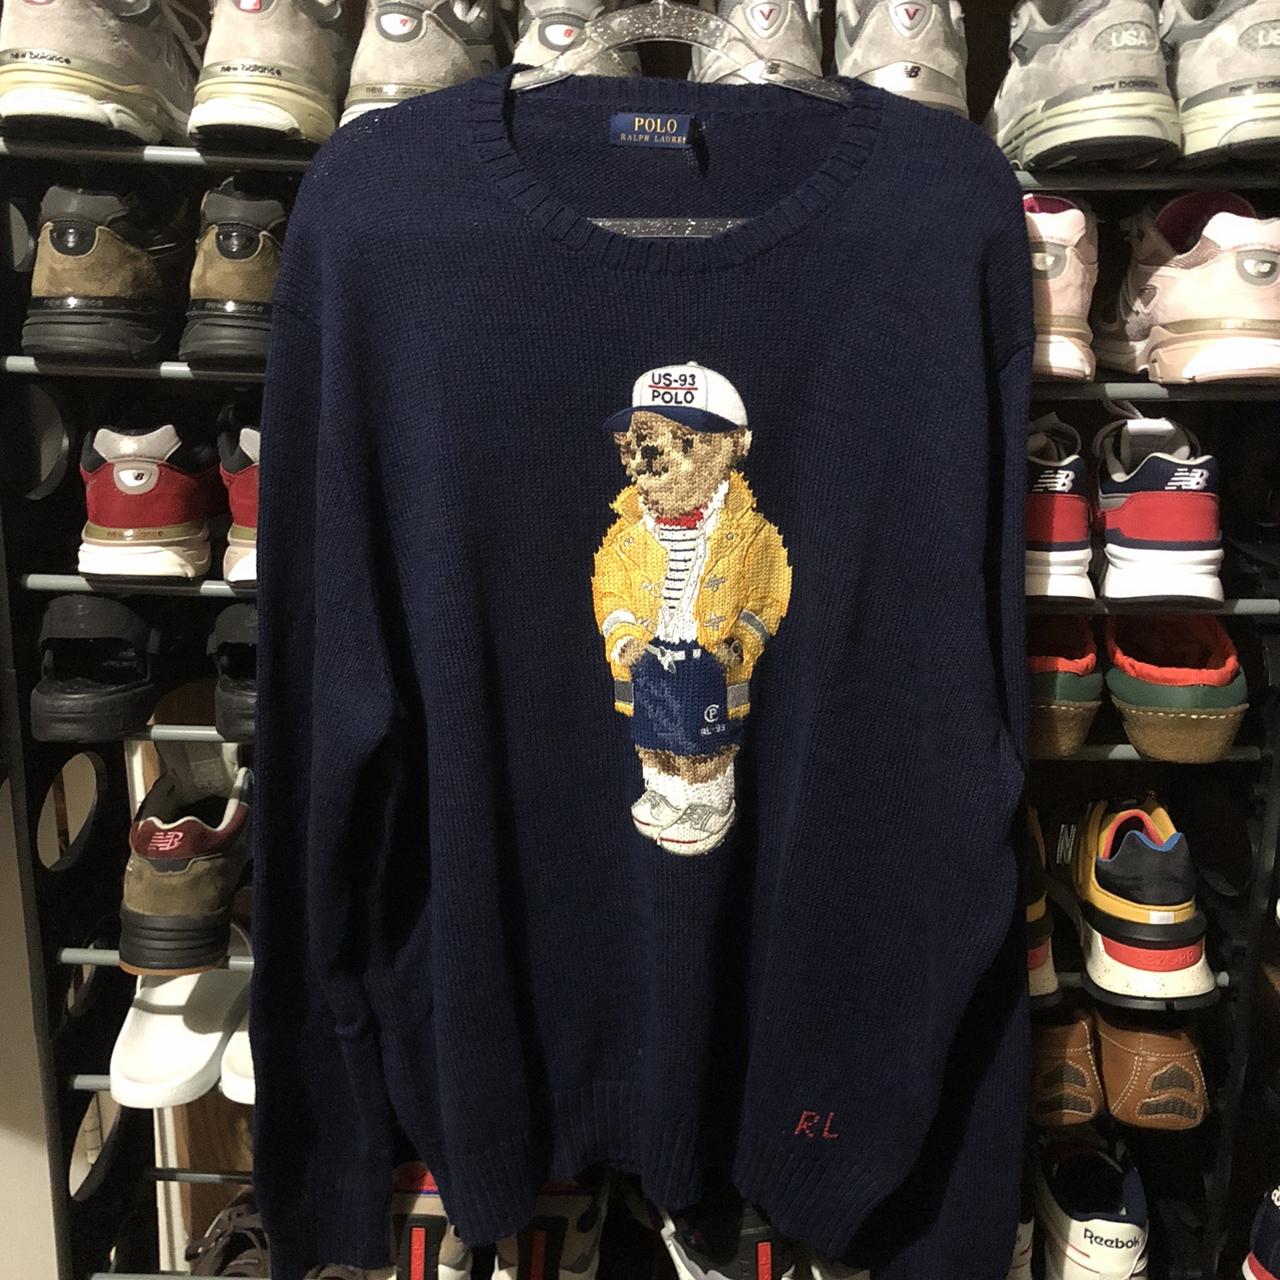 New Without Tags!! CP-93 Polo Bear knit Sweater size... - Depop